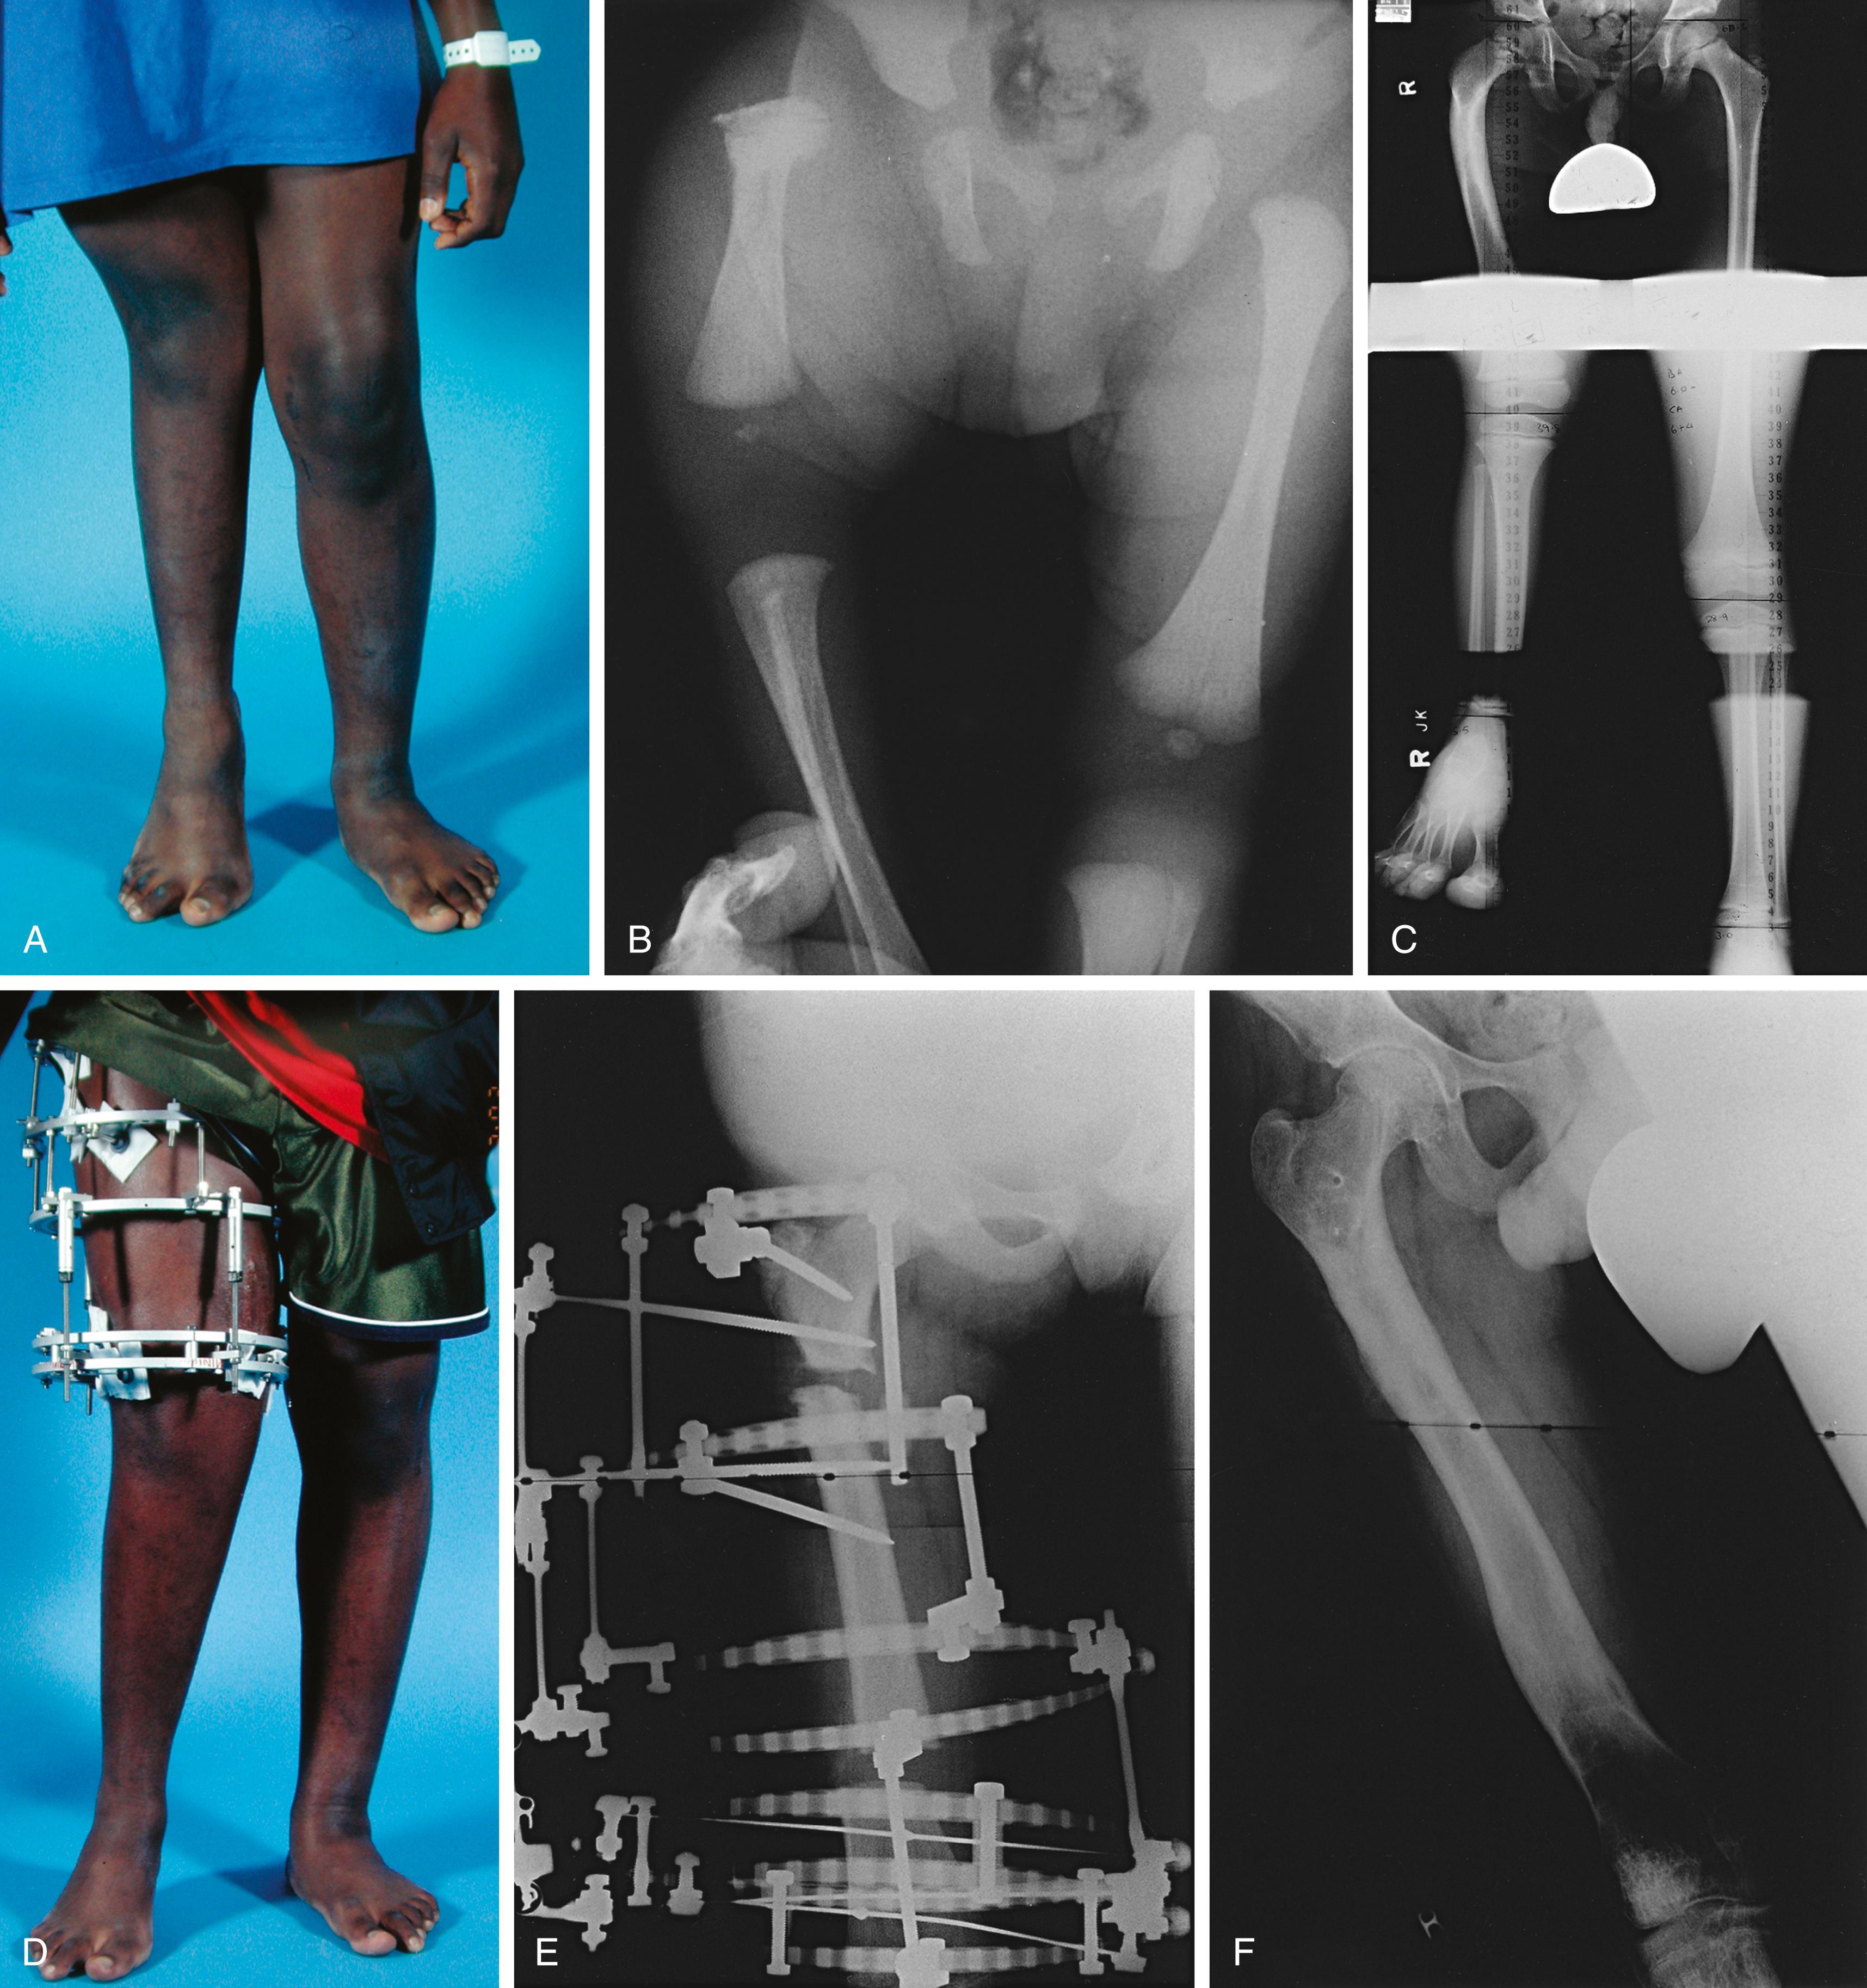 Fig. 21.25, Child with a Gillespie type A proximal femoral deficiency. (A) Front view showing a shortened right femur with lateral rotation of the femur and mild genu valgus. (B) Radiograph obtained at 1 month of age showing varus of the femoral neck, lateralization of the hip, and shortening of the femur. The femur is half as long as the contralateral femur. (C) Orthoroentgenogram obtained at 6 years of age showing a 12.5 cm limb length discrepancy. The hip appears reduced without treatment. (D) Patient at age 14 years with a circular fixator in place for femoral lengthening. (E) Radiograph showing placement of the circular fixator. (F) Radiograph obtained after femoral lengthening, in which the femur gained 9 cm. The patient also underwent a contralateral epiphysiodesis.